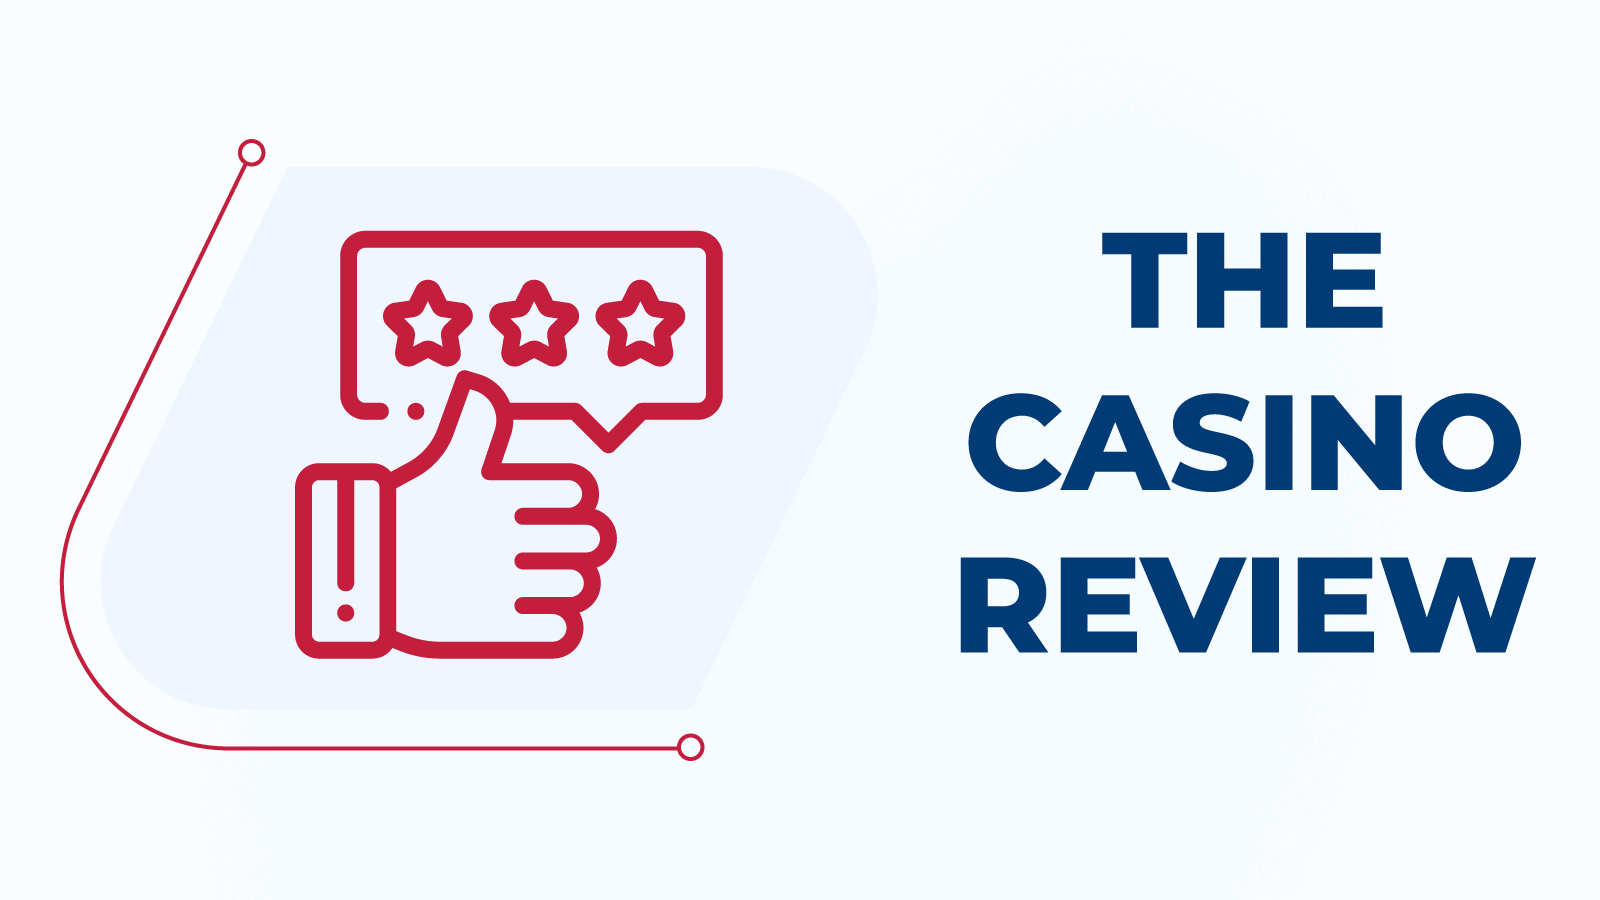 The Casino Review